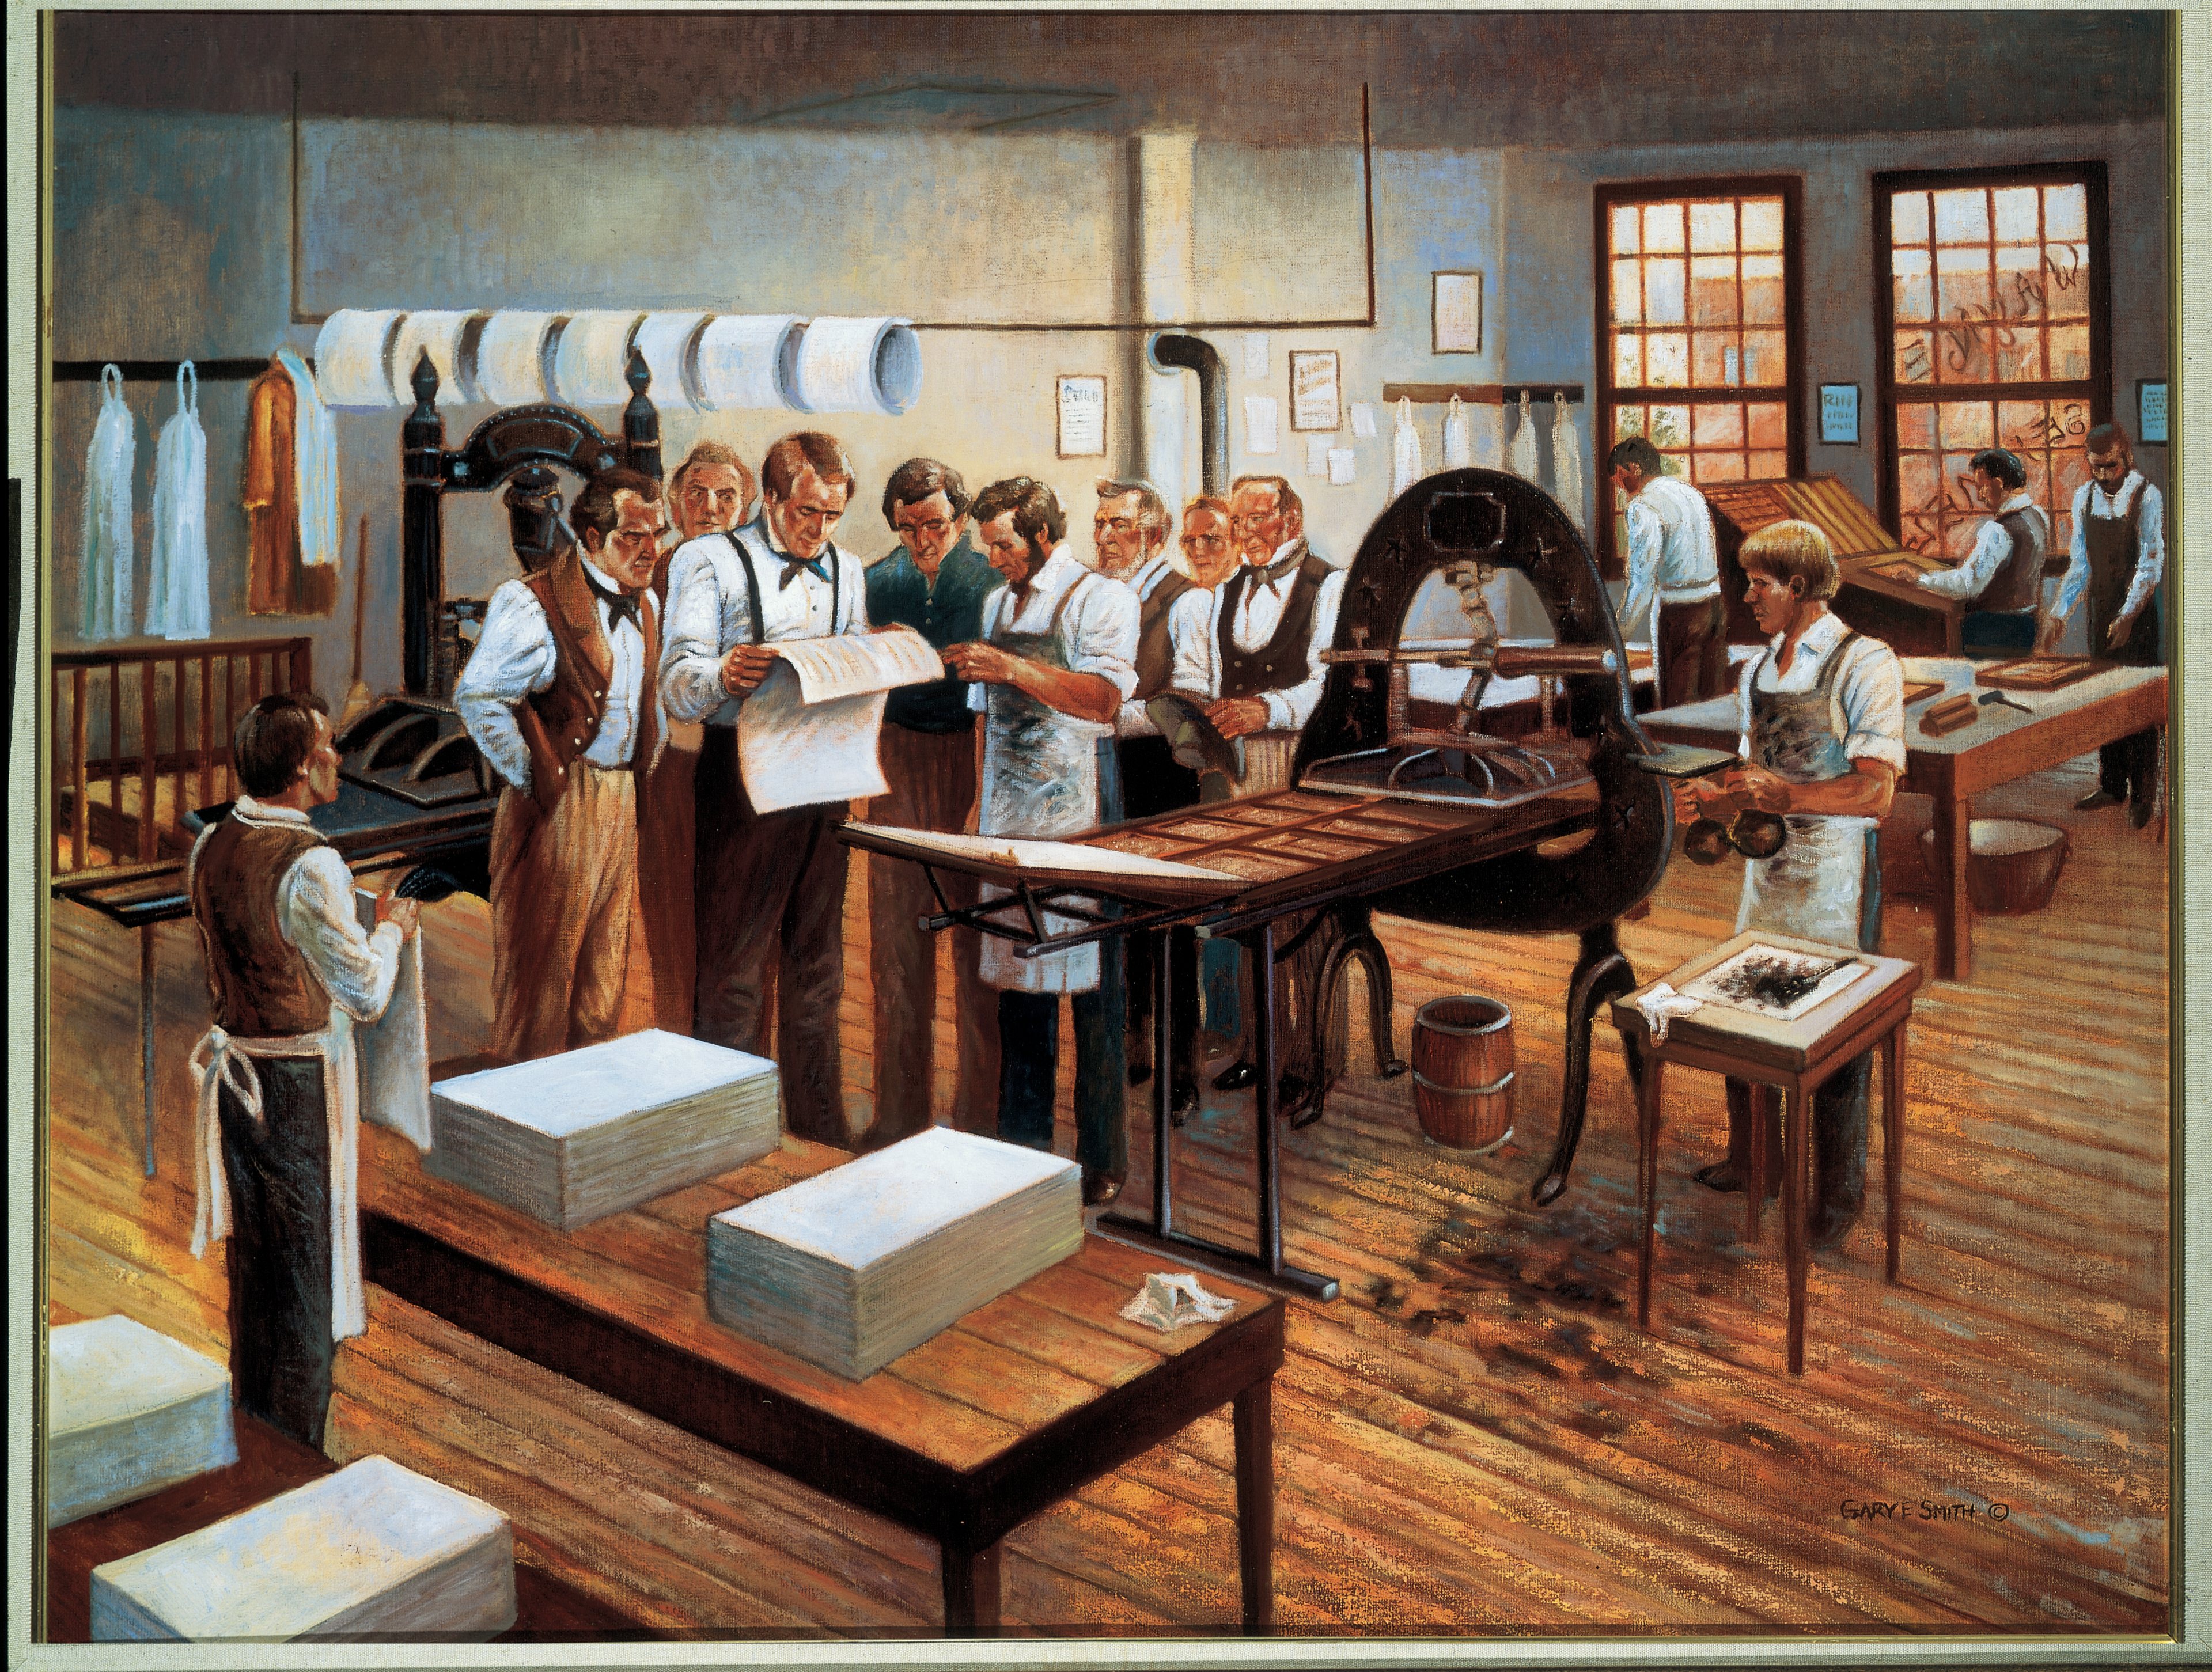 Joseph Smith an other men in the Grandin Press building looking at the first printed pages of the Book of Mormon.